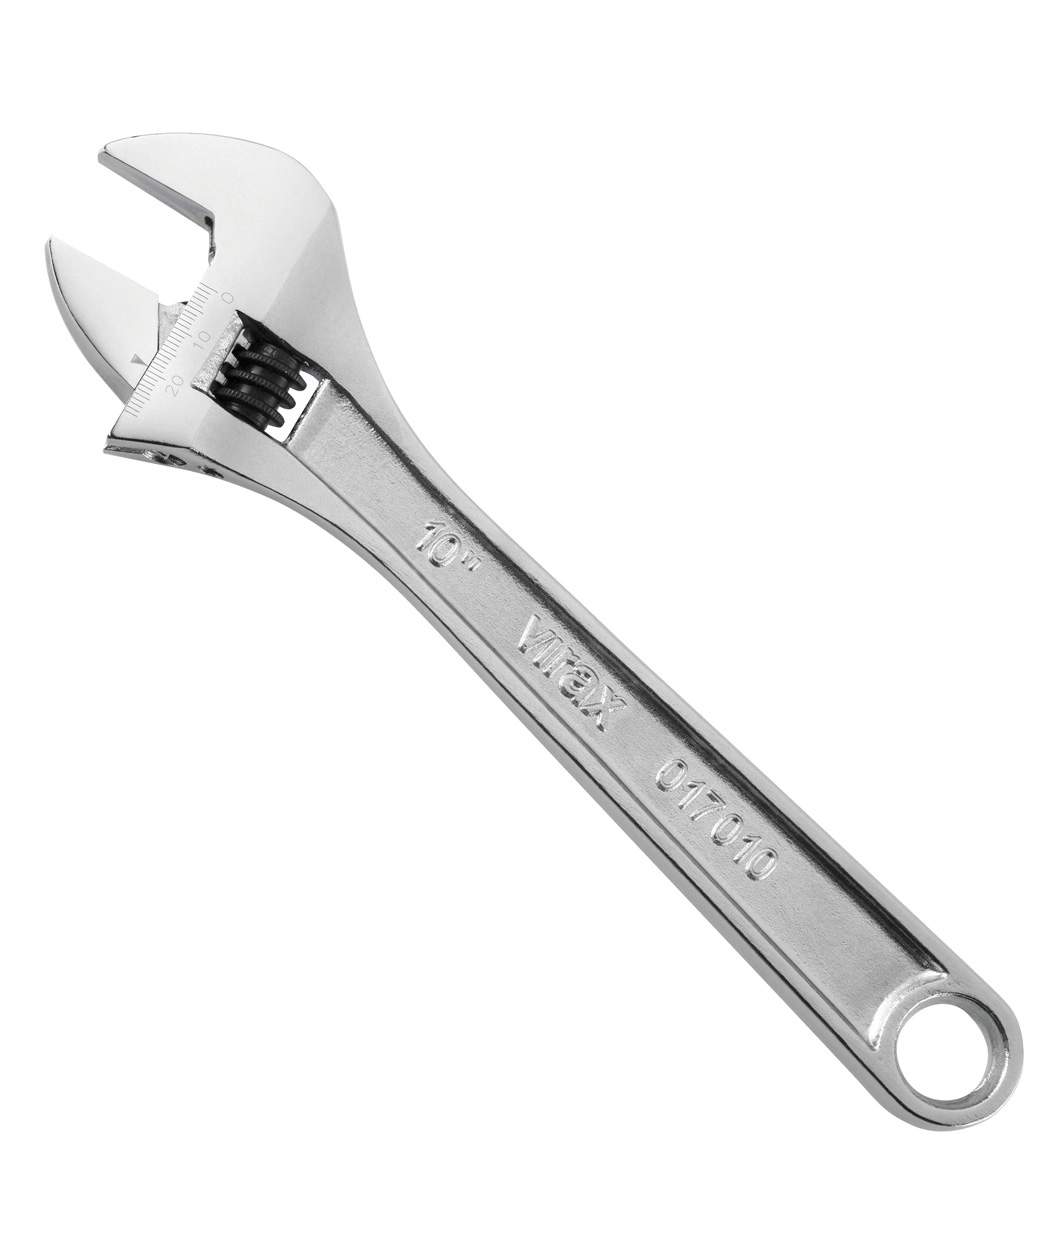 19 mm - 6" wrench